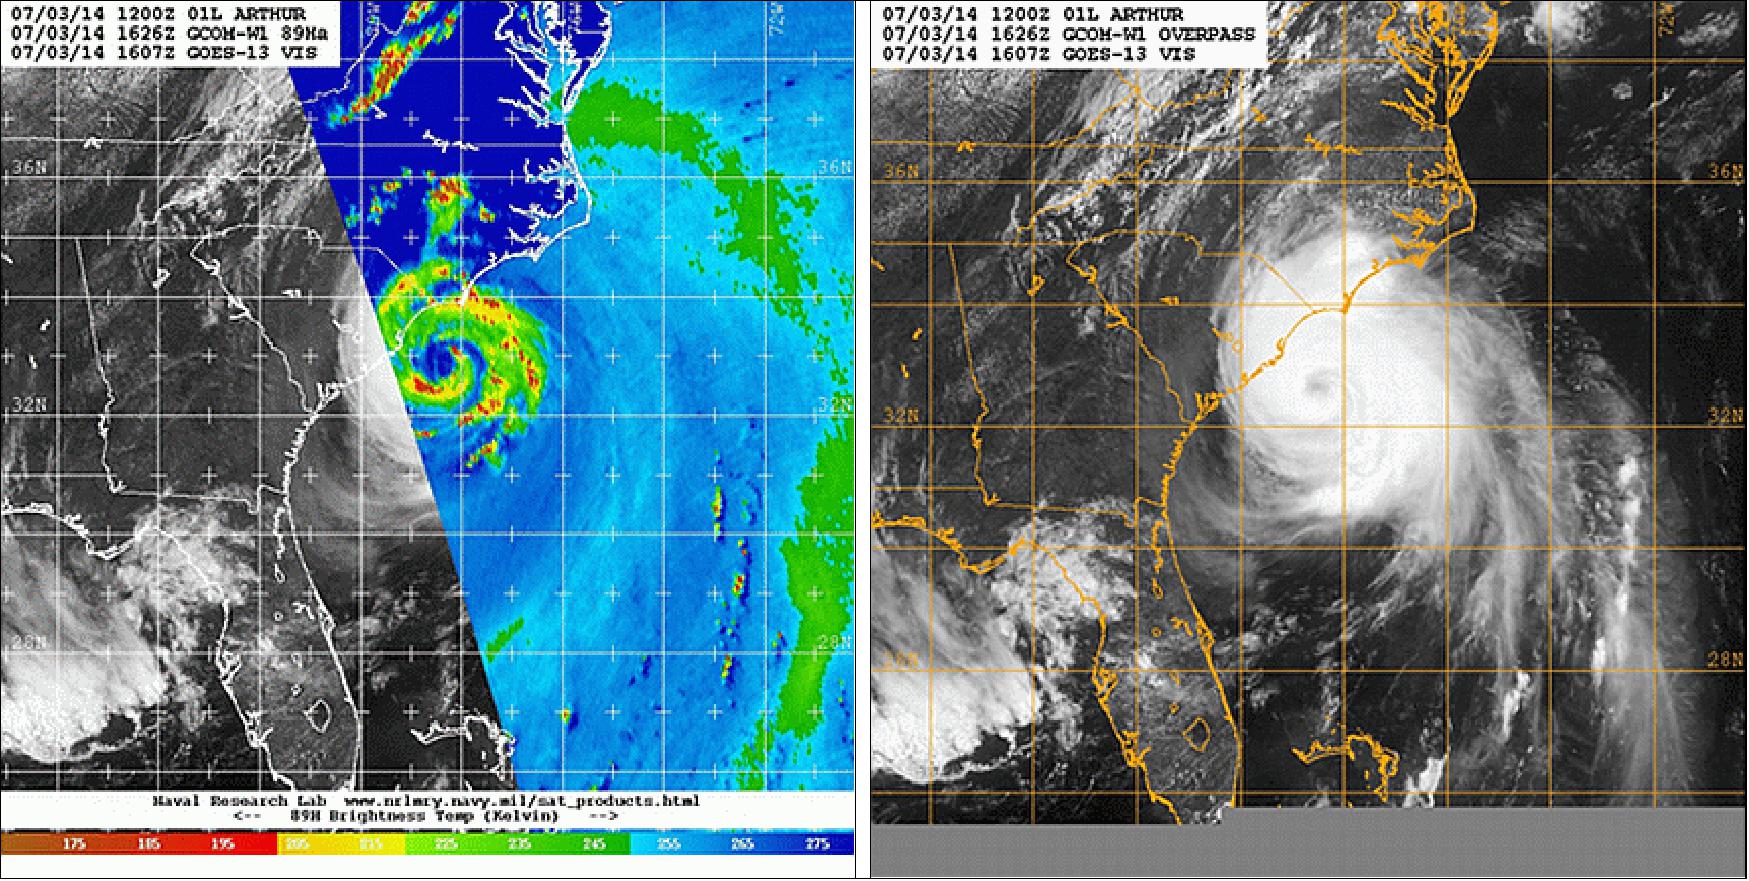 Figure 16: Images of Hurricane “Arthur” on July 3, 2014acquired by microwave observation of AMSR2 on GCOM-W1(left) and by infrared observation (right), image credit: NOAA and NRL